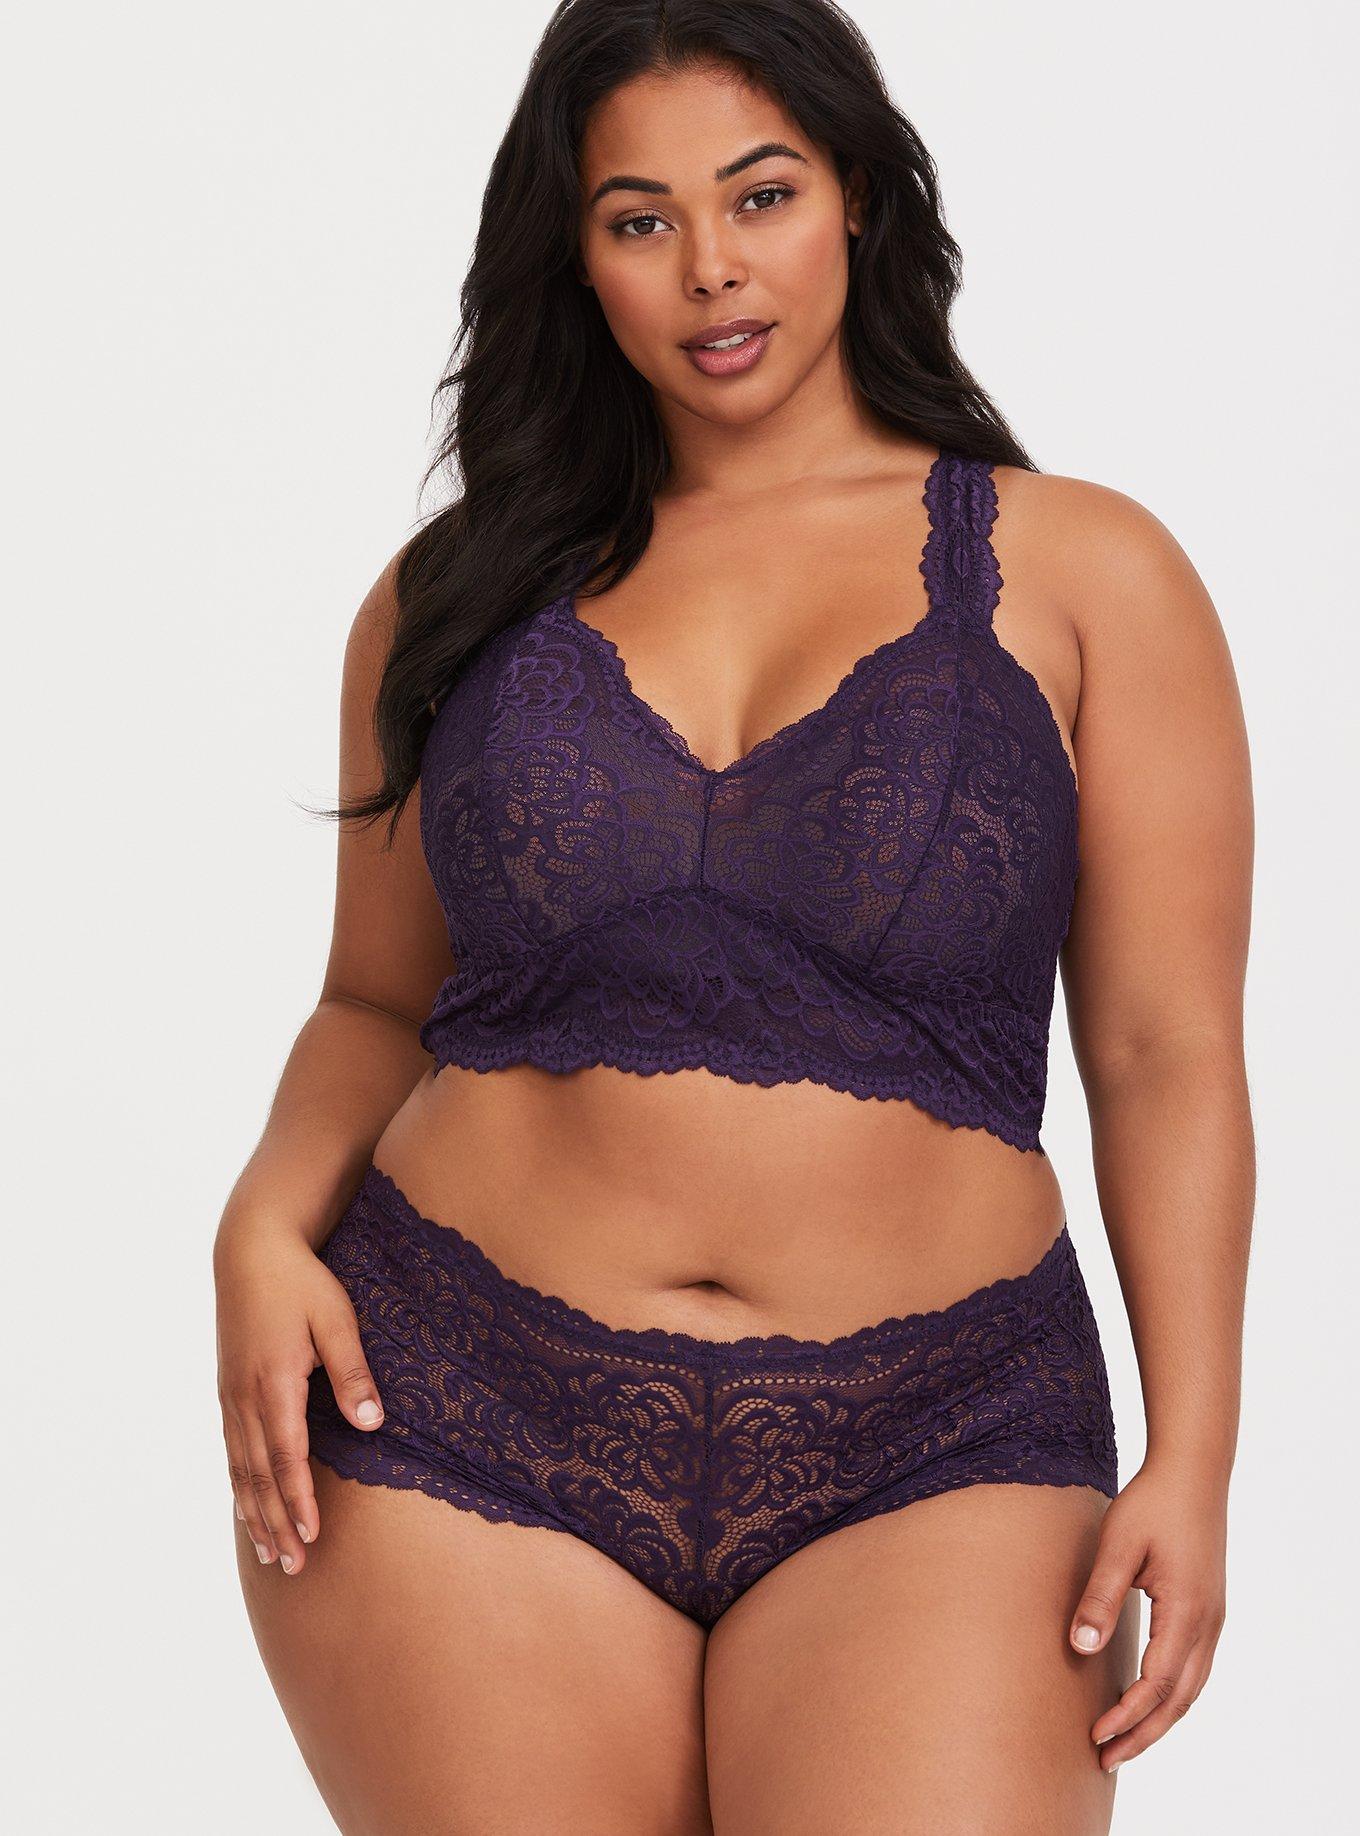 Purple Lingerie Set, Aubogene and Lavender Plus Size Thong and